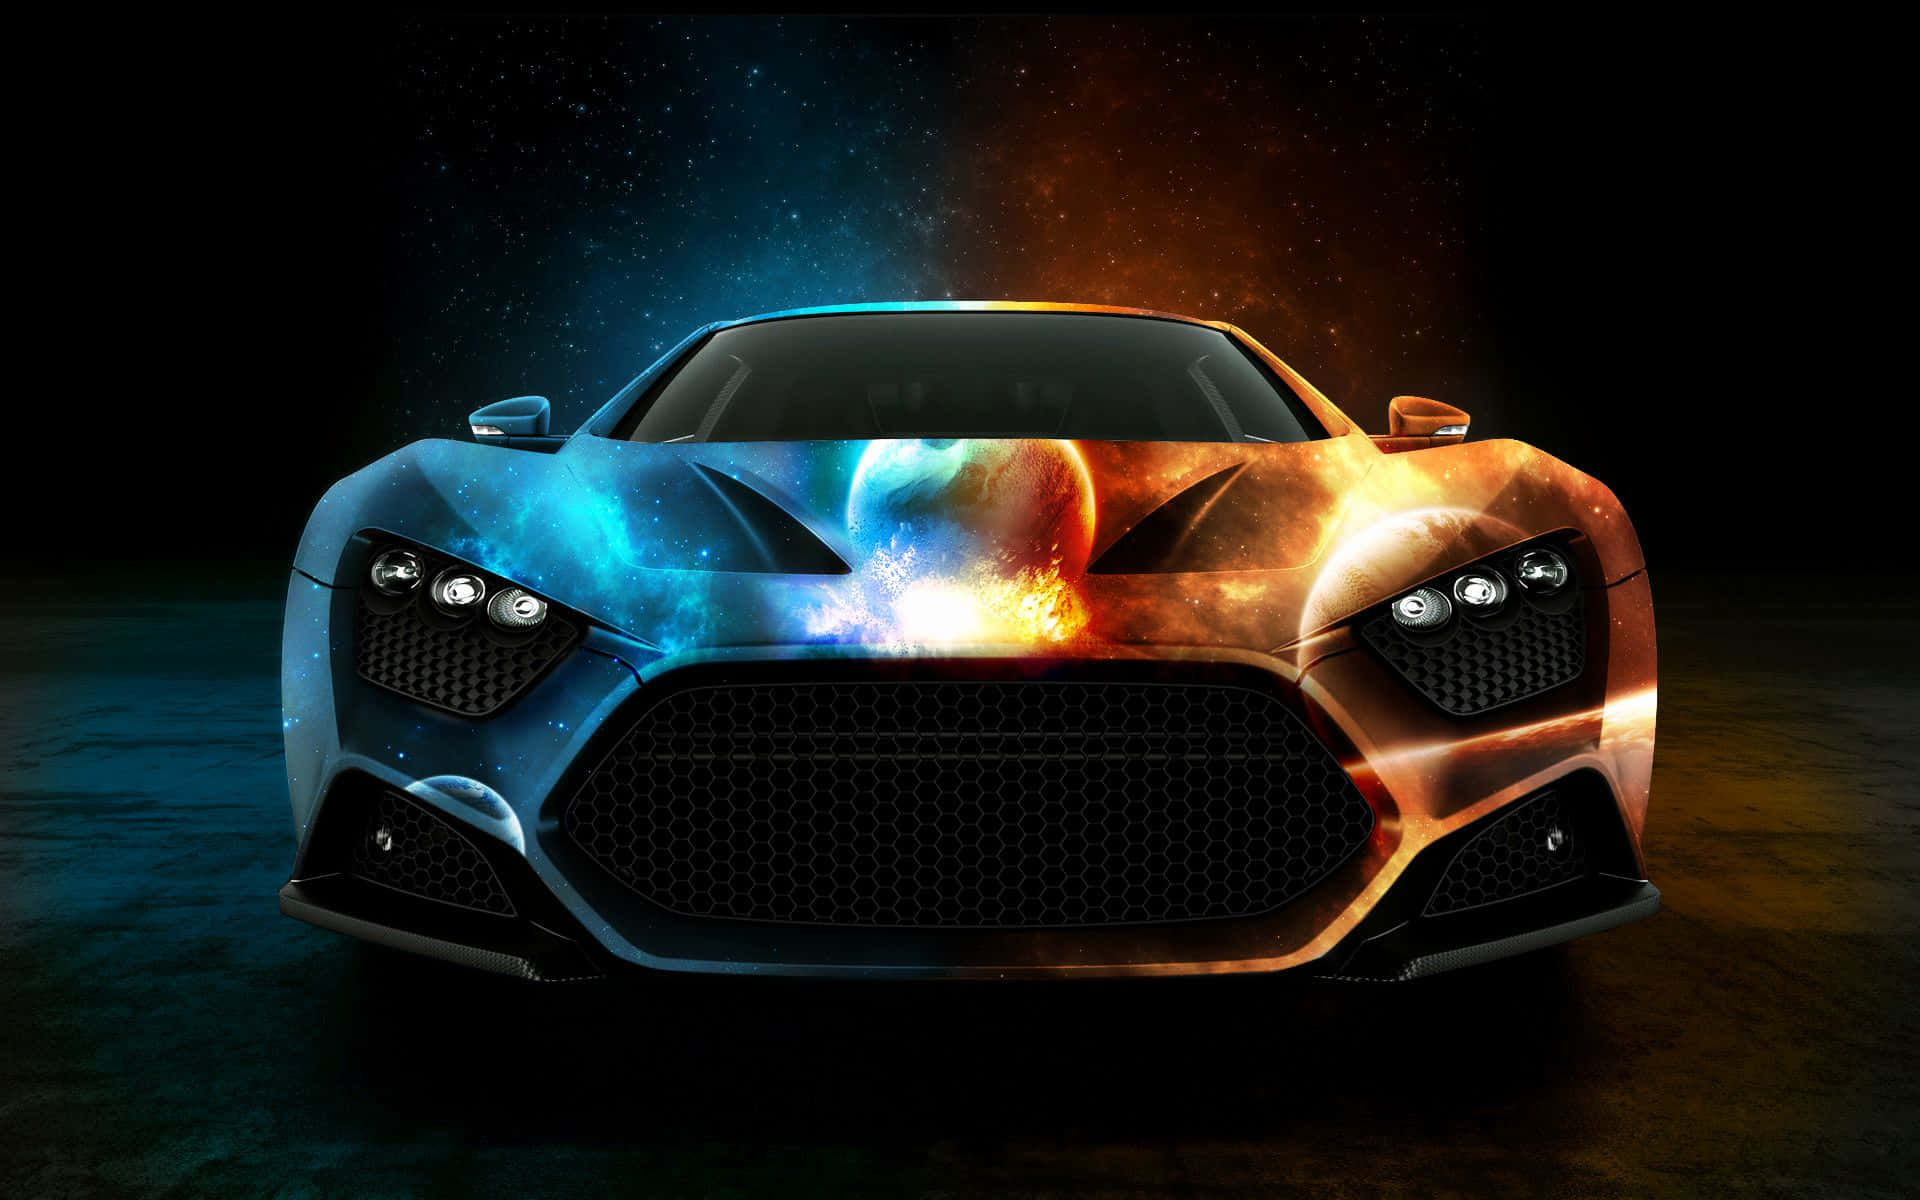 Top 10 Car Ice And Fire Zenvo St1 Wallpaper